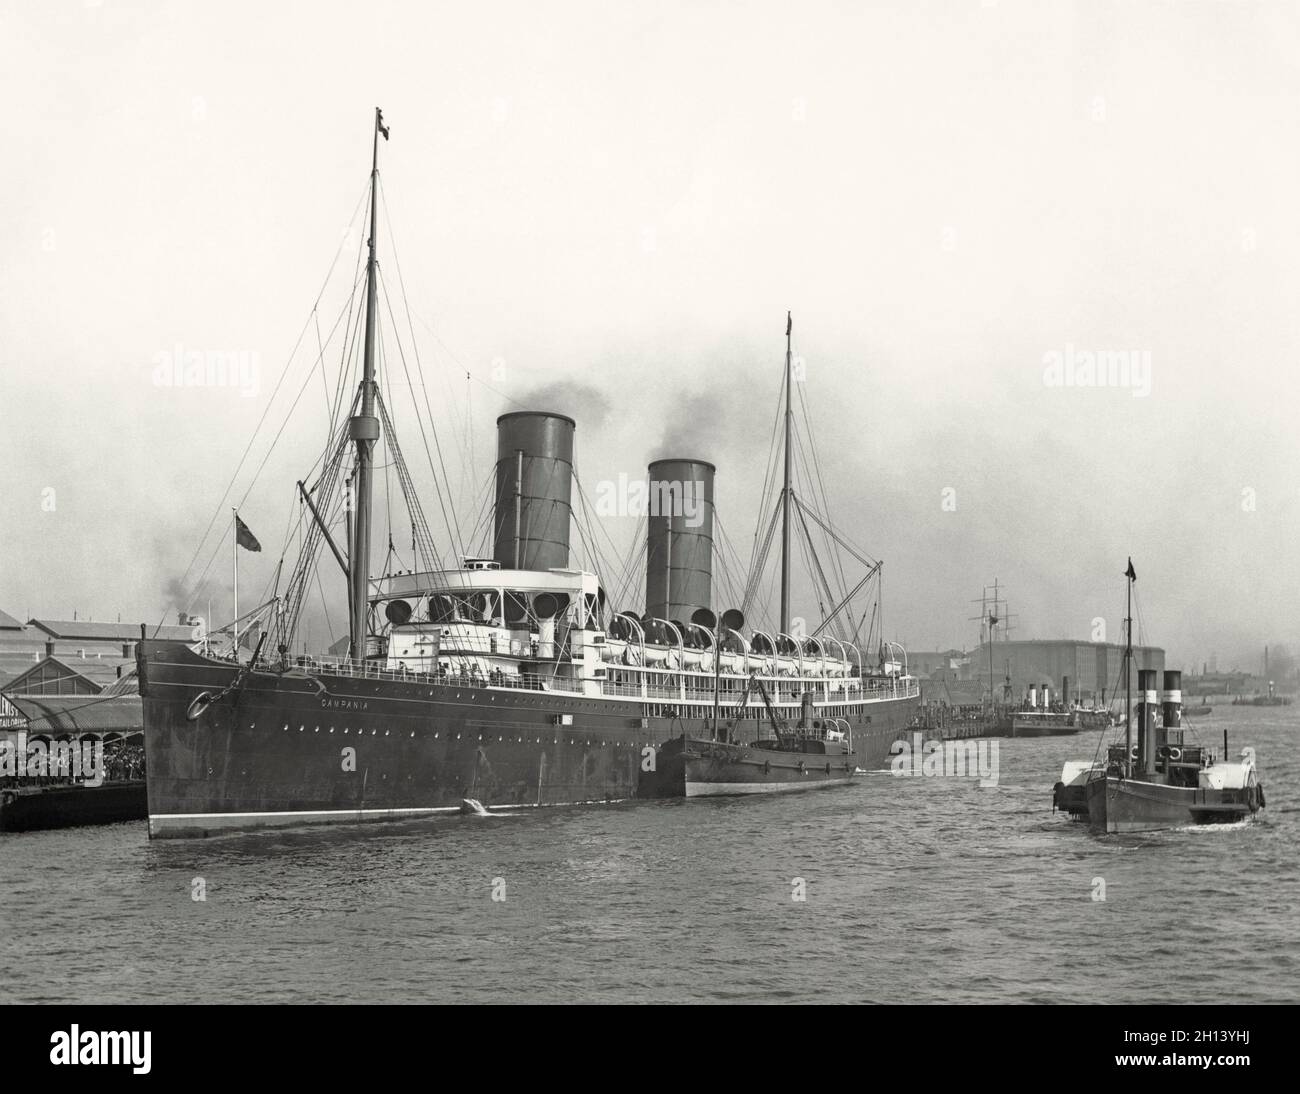 RMS Campania in port in the early 1900s – the ship was a British ocean liner owned by the Cunard Steamship Line Shipping Co, built in Govan, Scotland. Launched in1892, she was the largest and fastest passenger liner when she entered service in 1893, winning the prestigious Blue Riband. Her last passenger voyage was in 1914. Campania had a reprieve from being scrapped. The UK Admiralty converted her to an armed merchant cruiser that could carry seaplanes. HMS Campania looked little like her original configuration. She served until 1918 when she sank in the Firth of Forth – a vintage 1900s photo Stock Photo